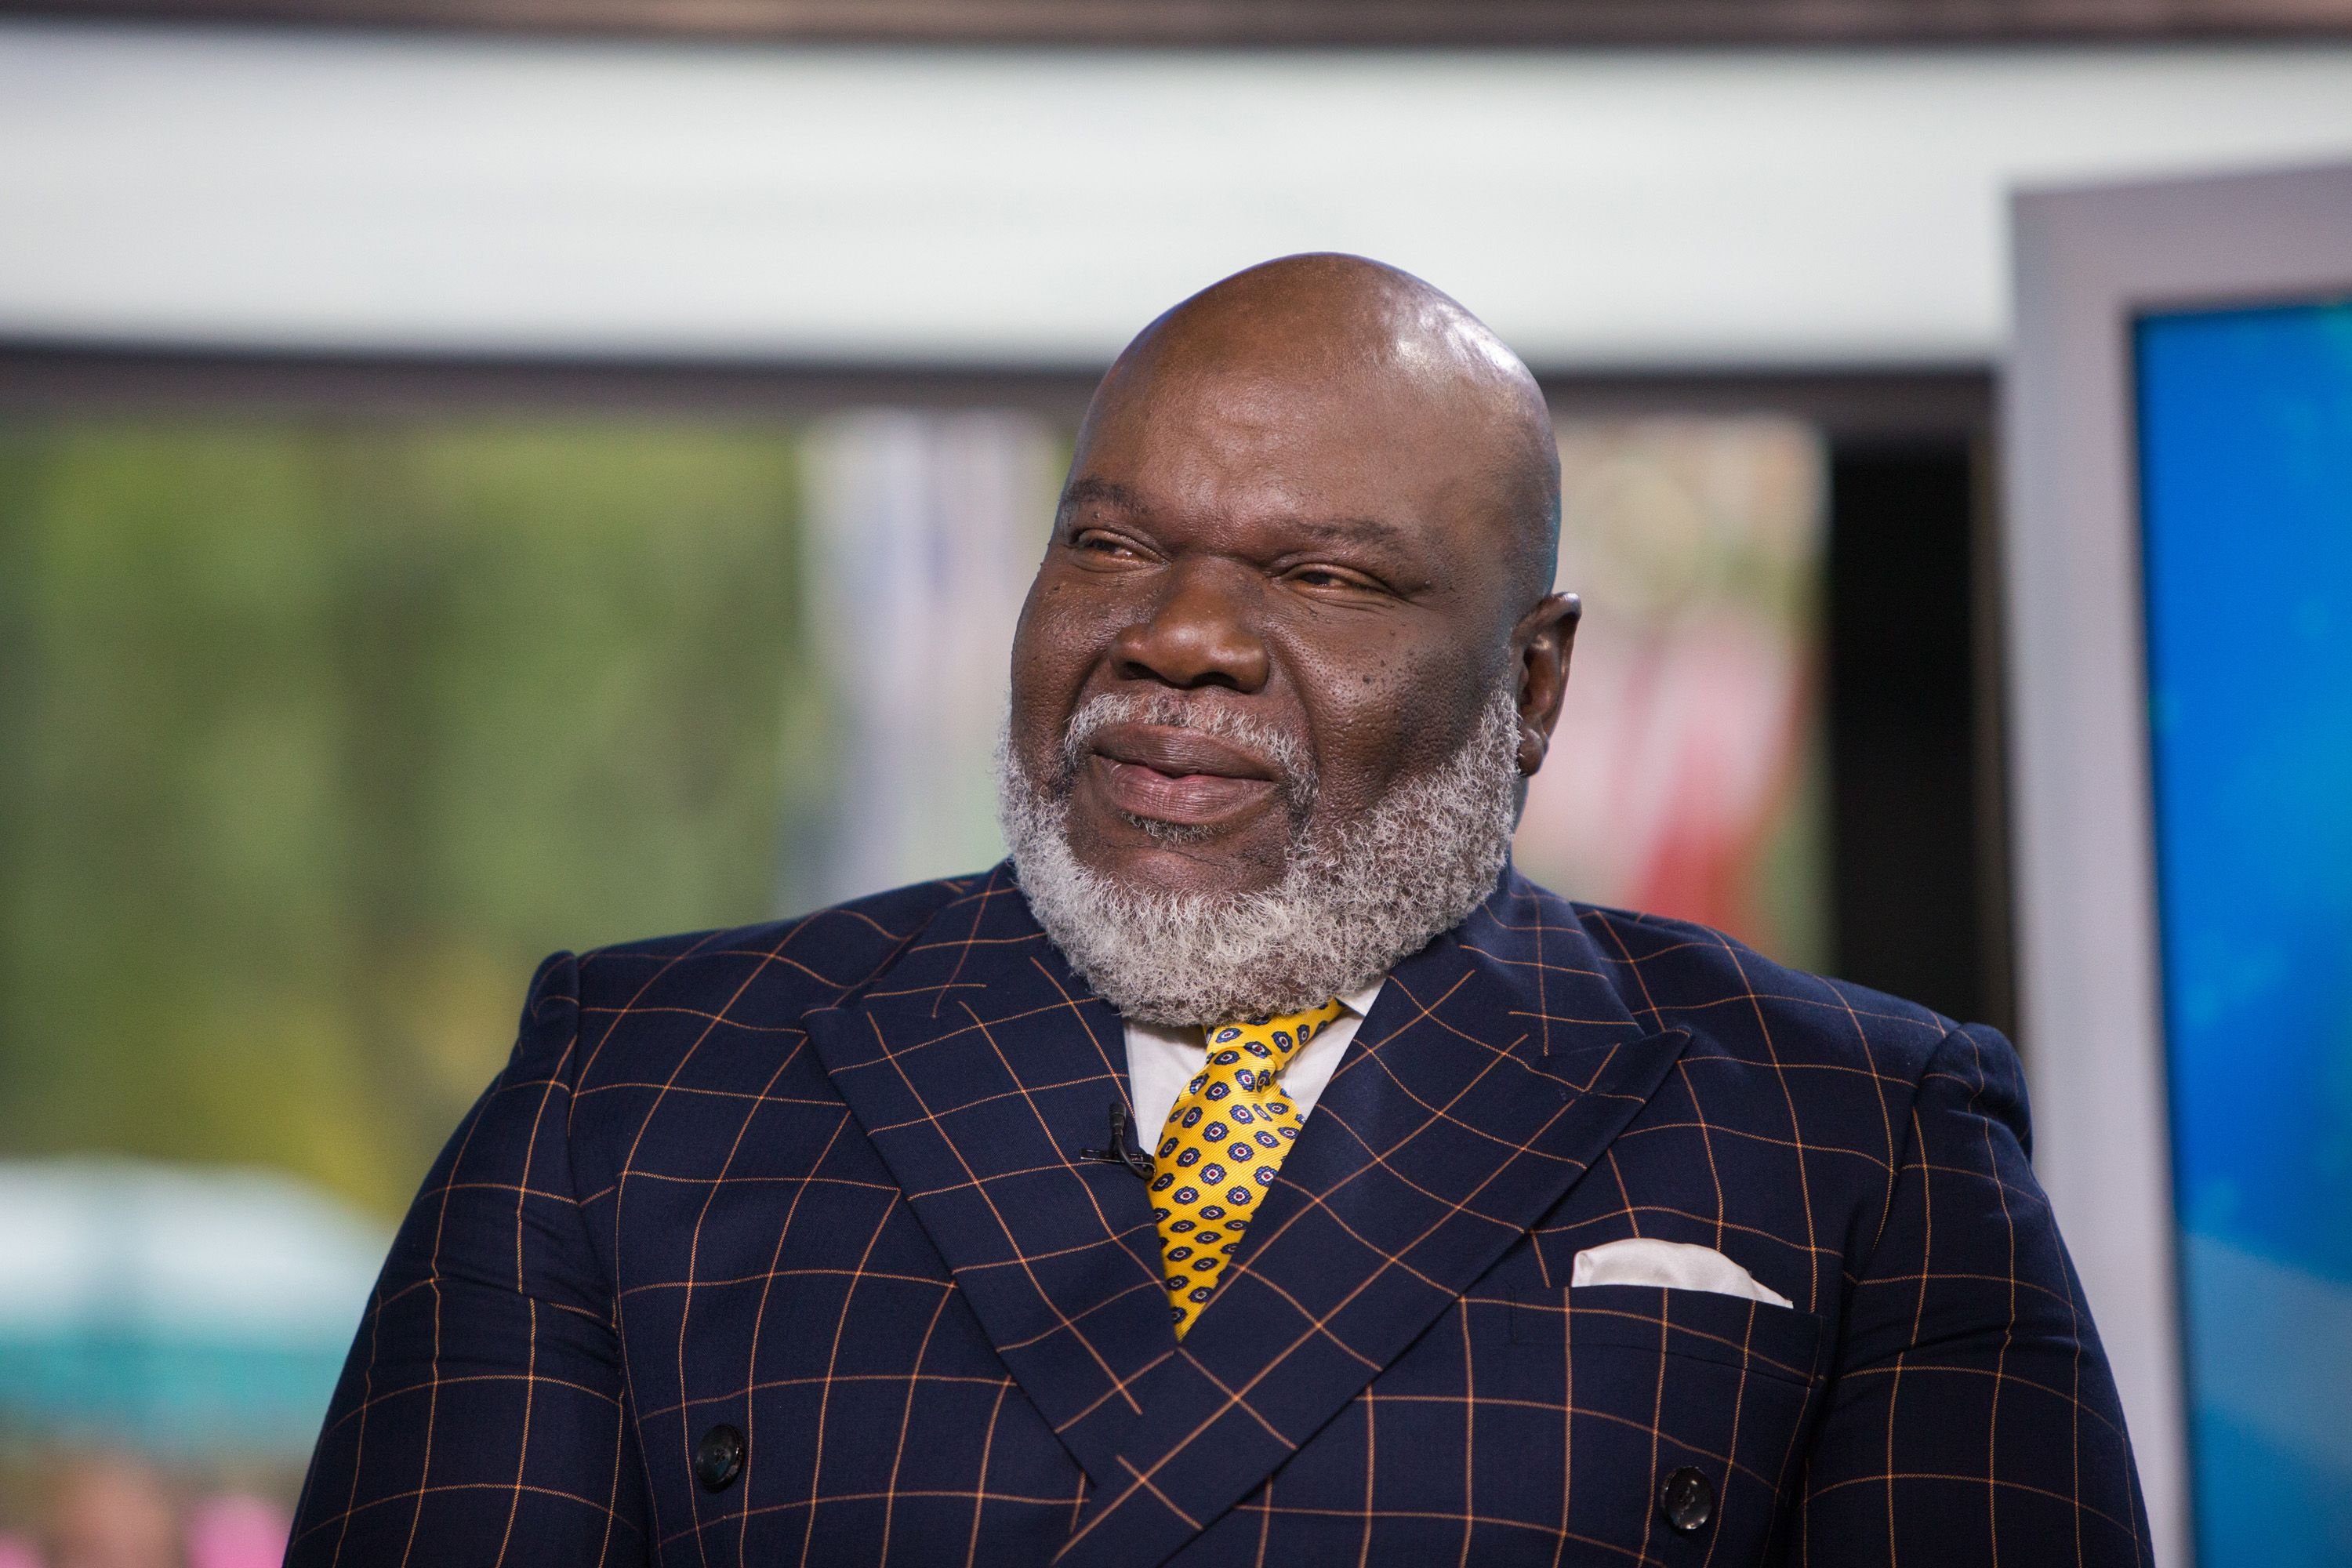 Bishop T.D. Jakes during a television interview on October 9, 2017. | Photo: Getty Images